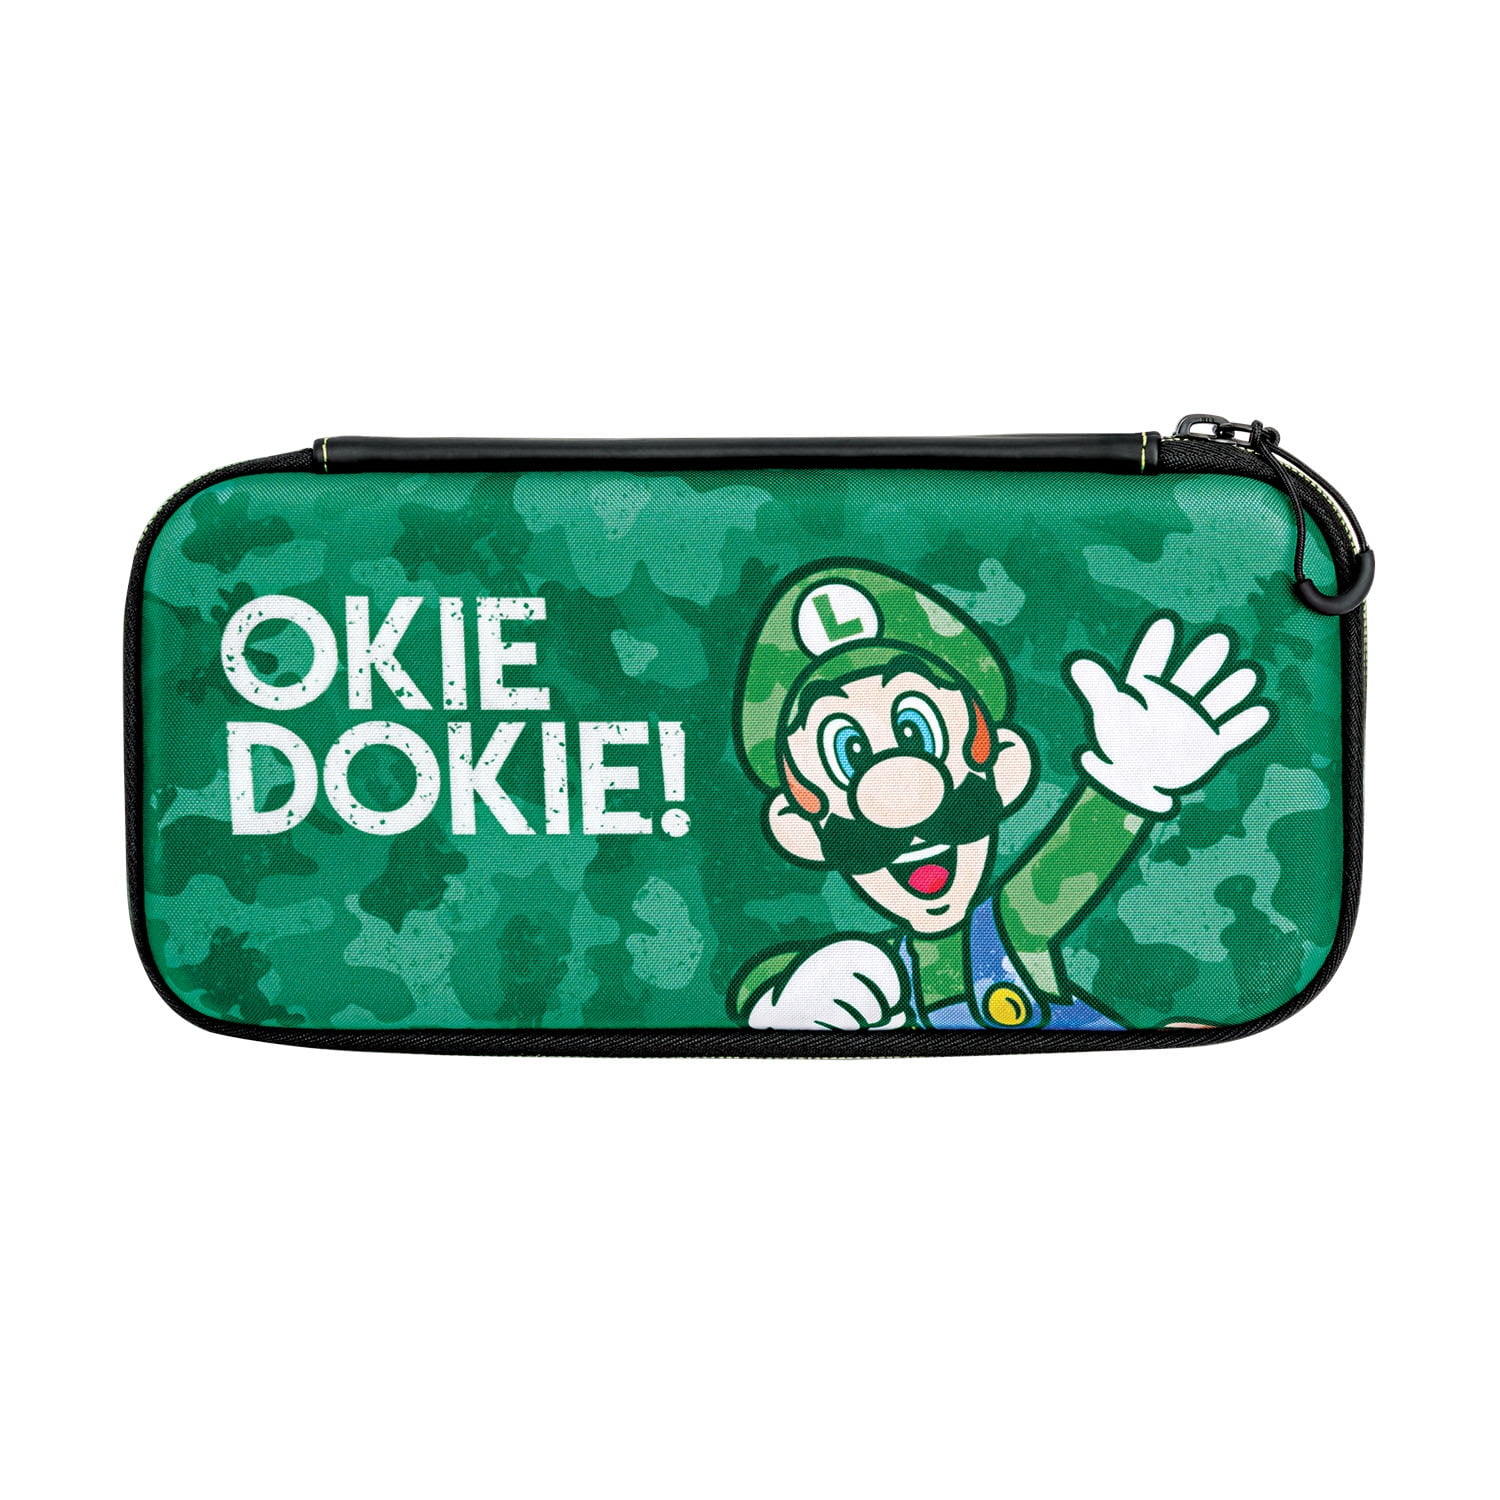 mario & bowser edition carrying case